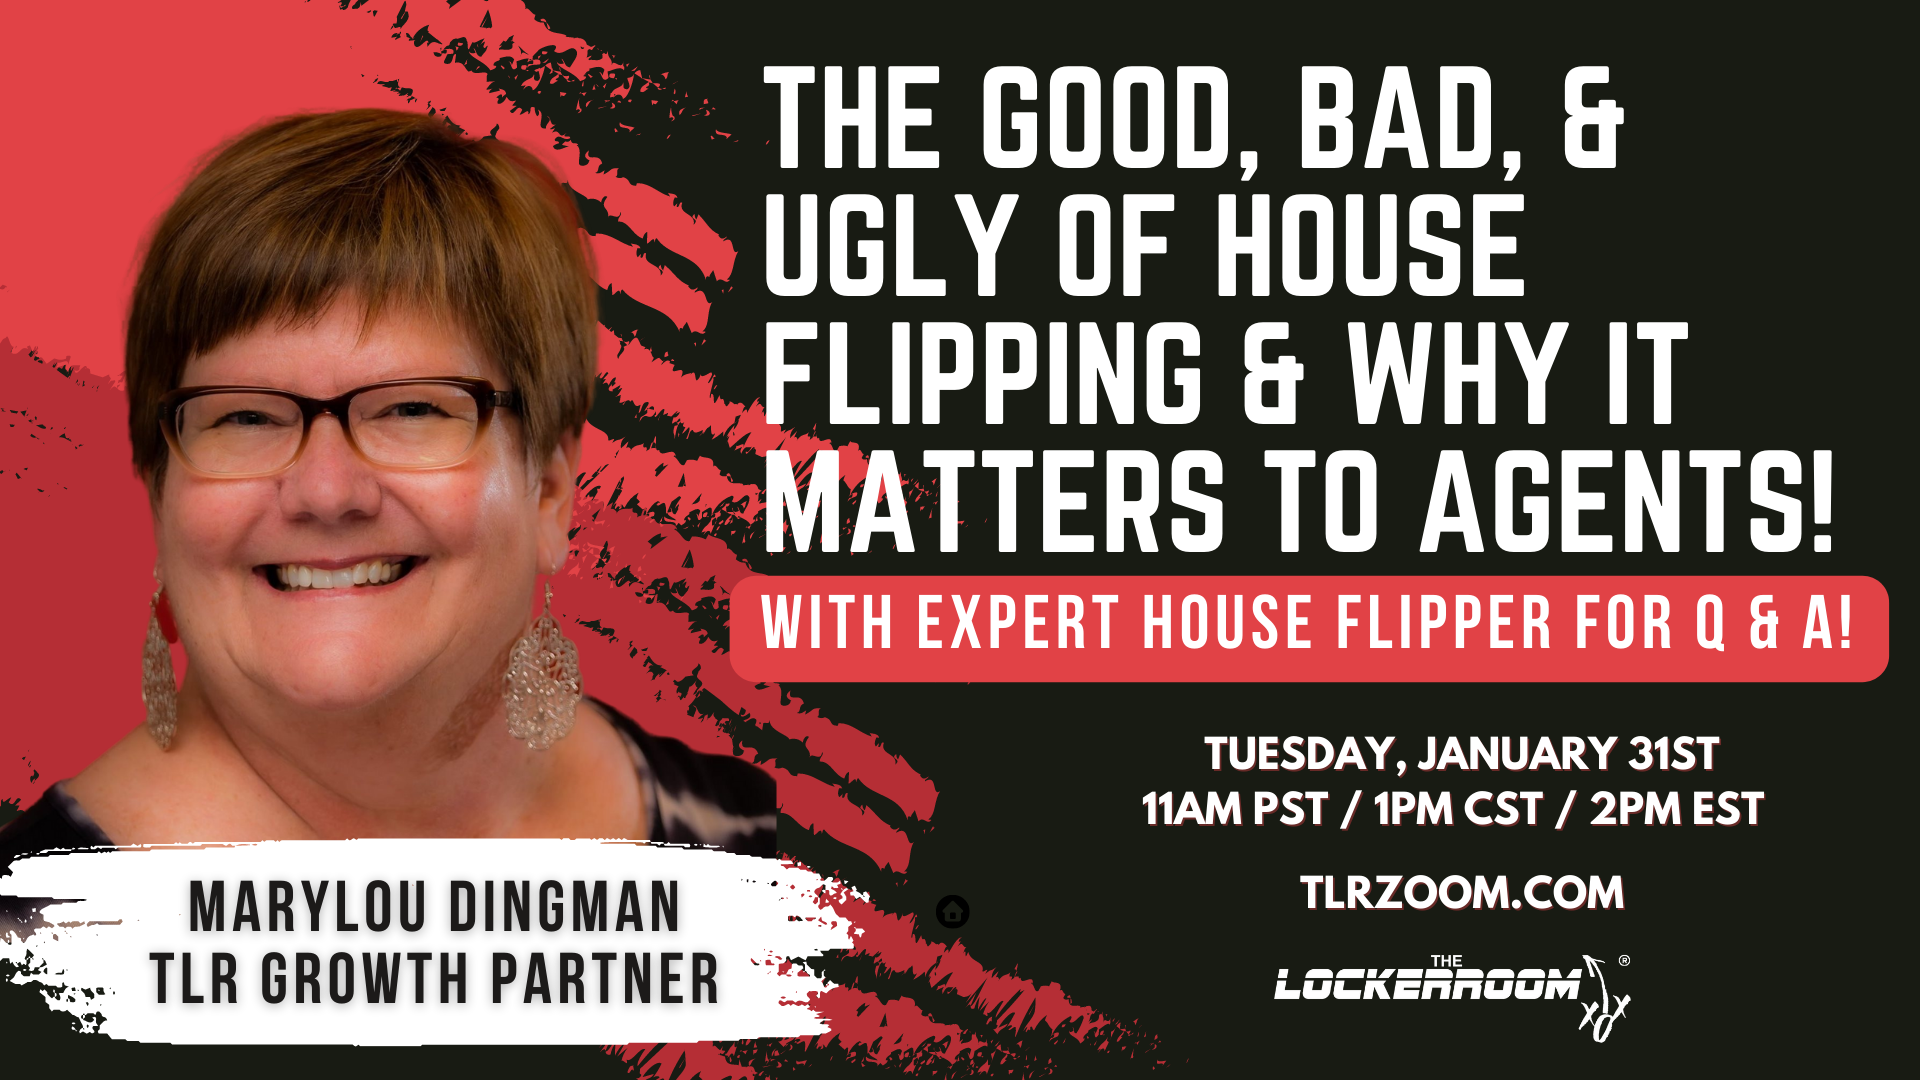 
TLR: The good, bad, & ugly of flipping & why it matters to agents!